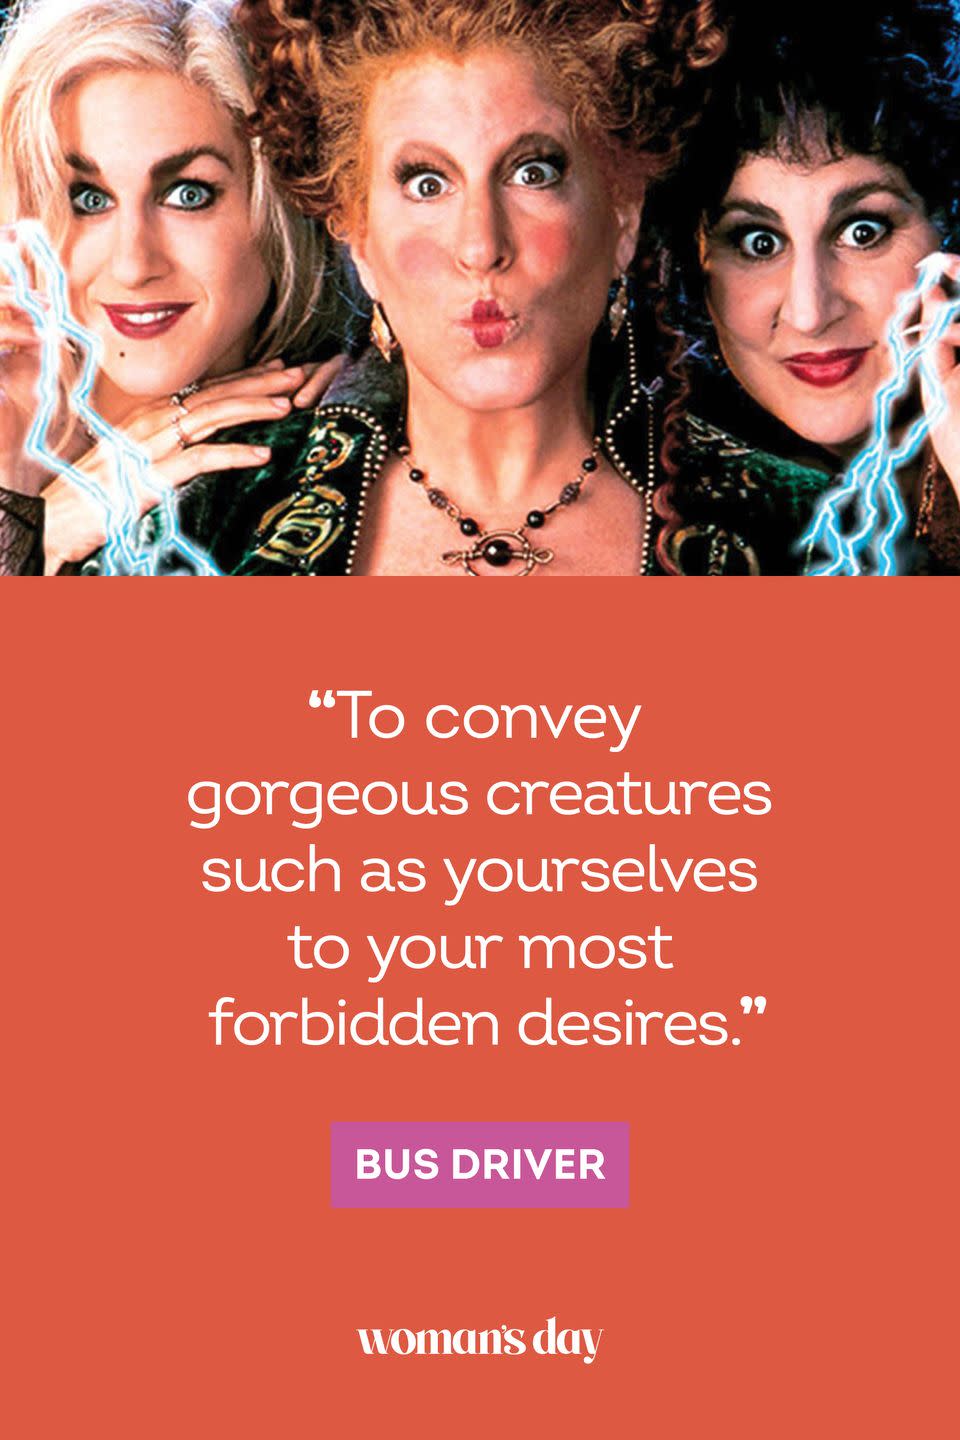 <p>“To convey gorgeous creatures such as yourselves to your most forbidden desires.” — Bus Driver</p>